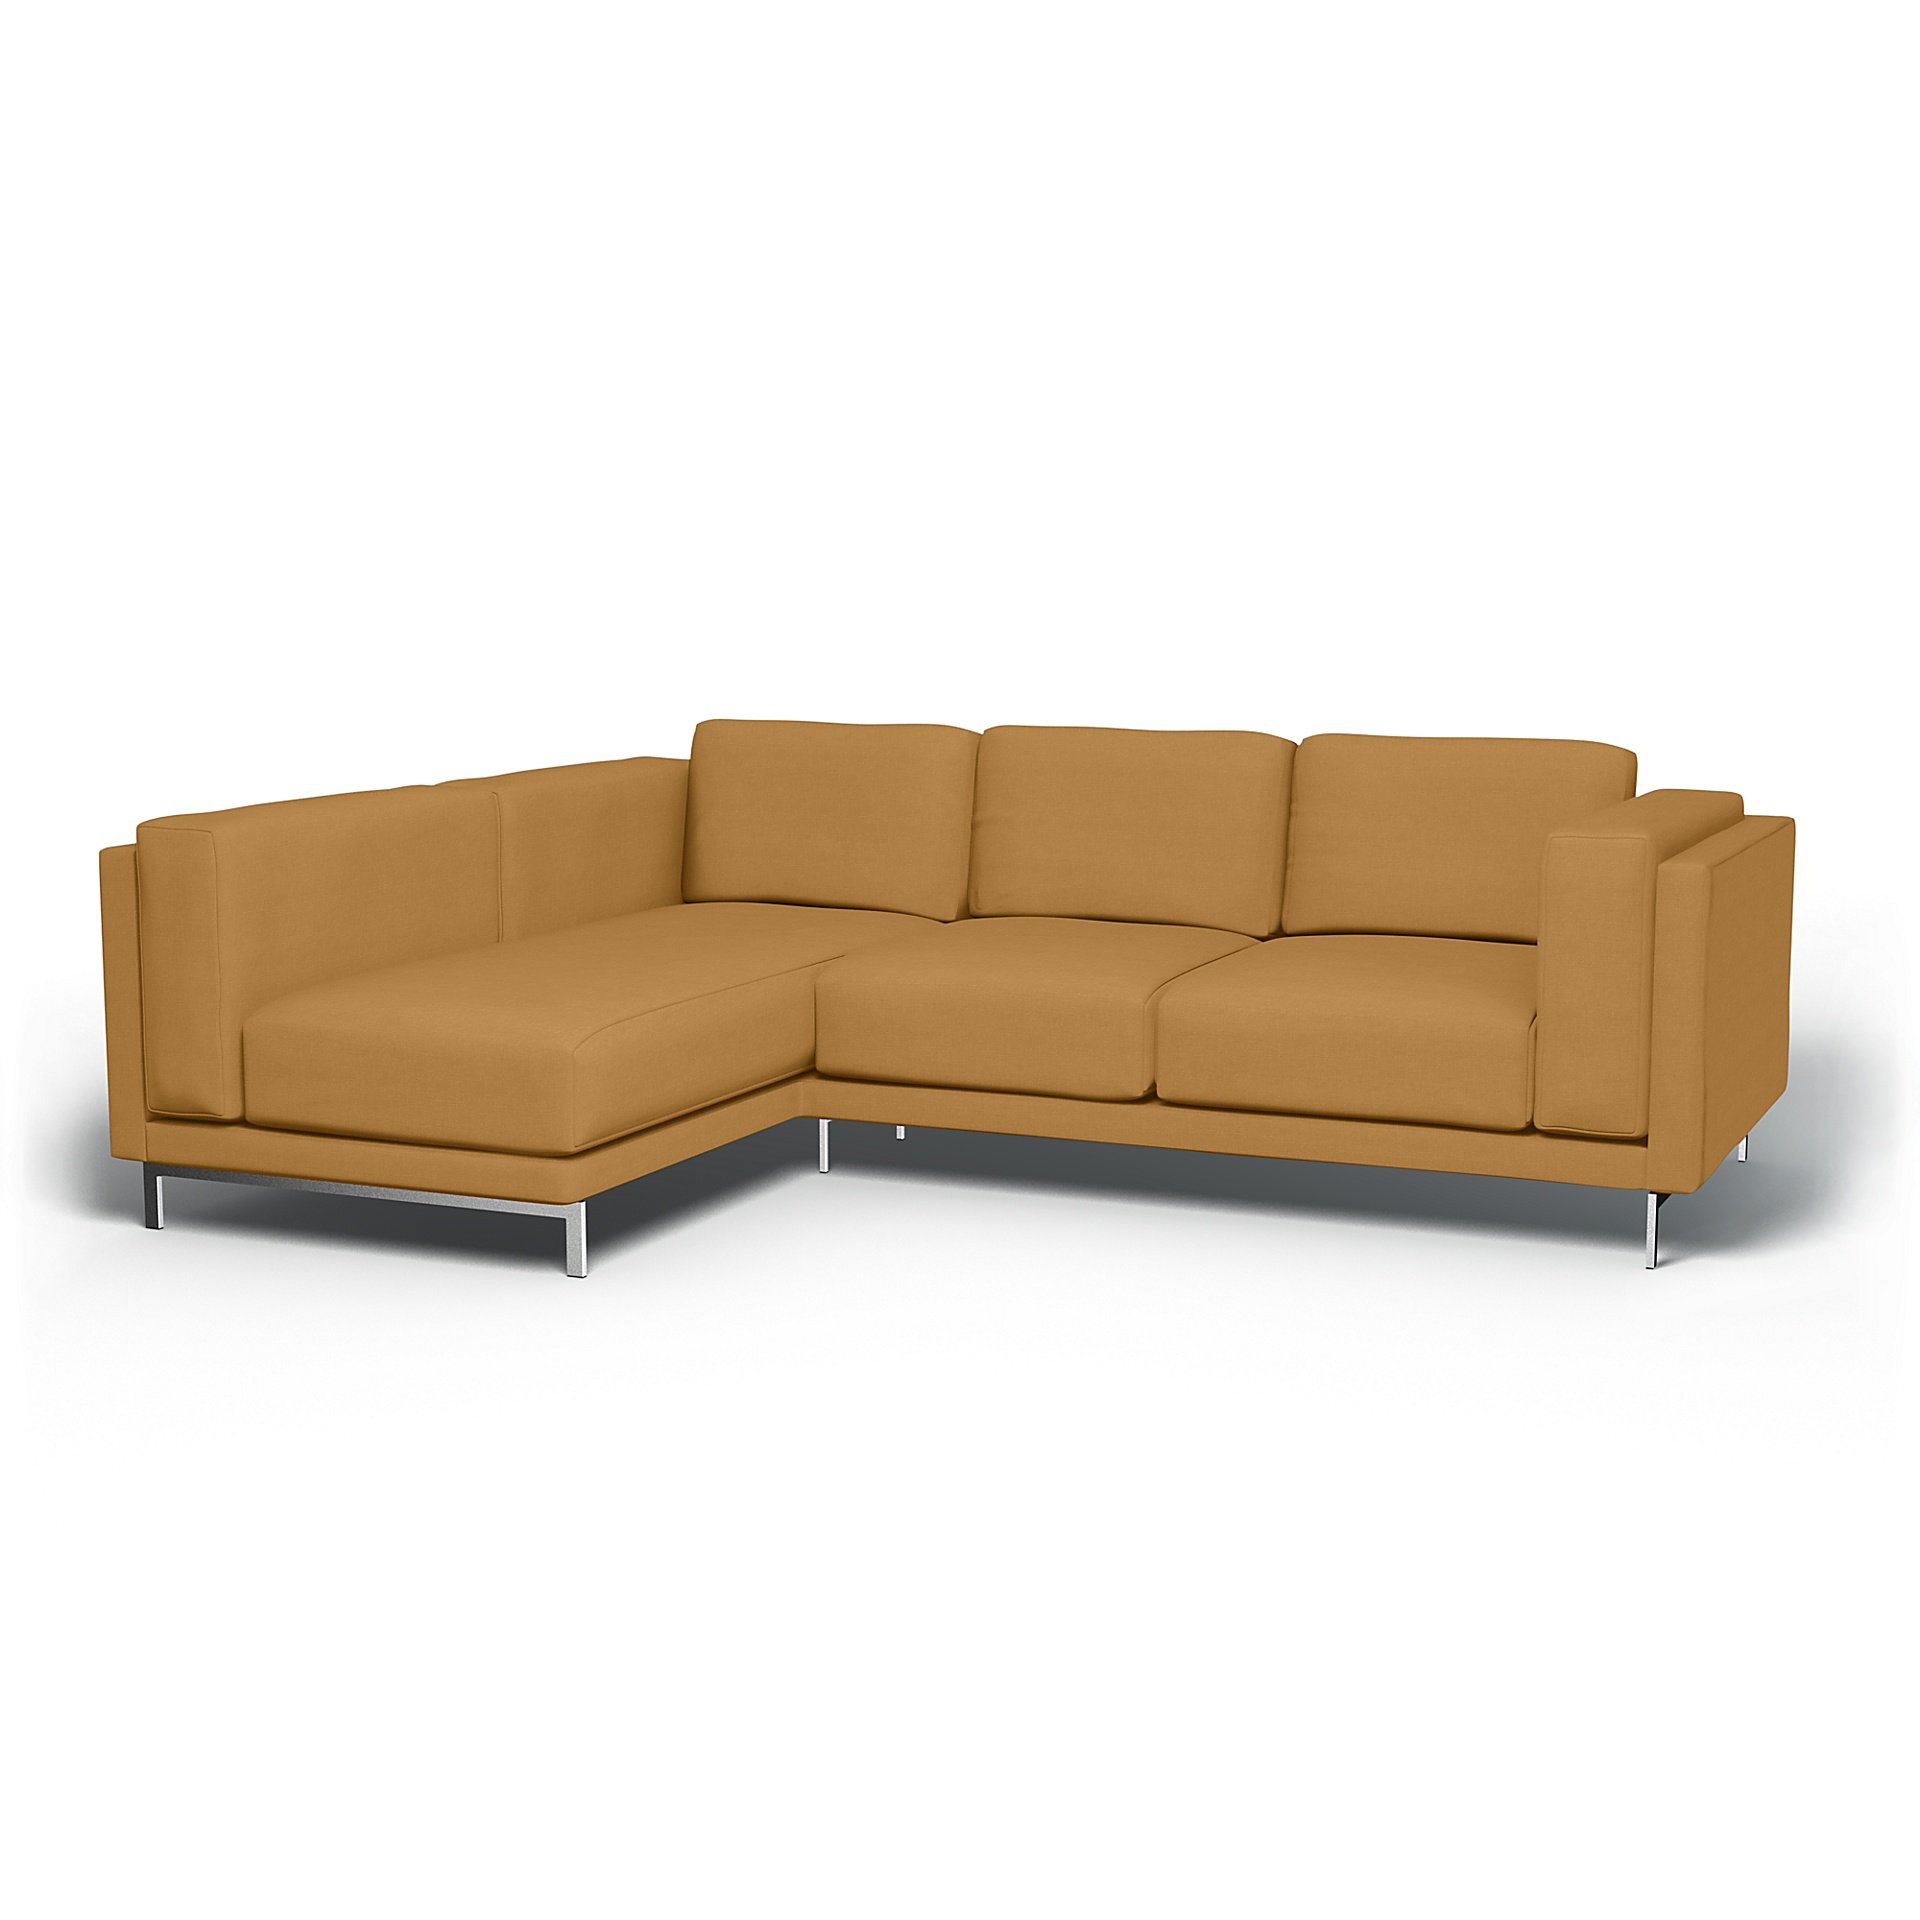 IKEA - Nockeby 3 Seater Sofa with Left Chaise Cover, Mustard, Linen - Bemz